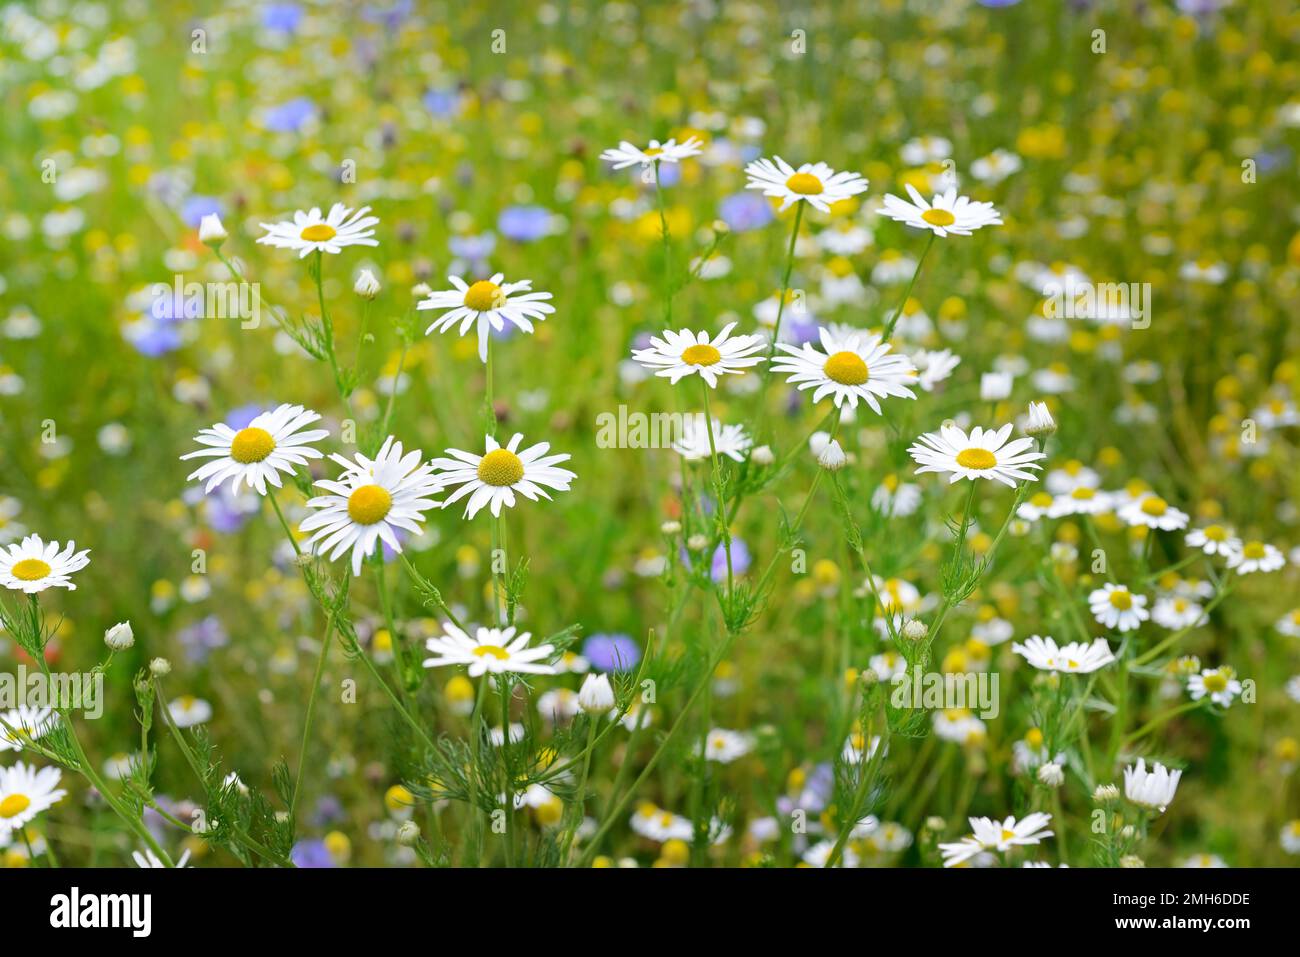 White camomiles on a background of green grass Stock Photo